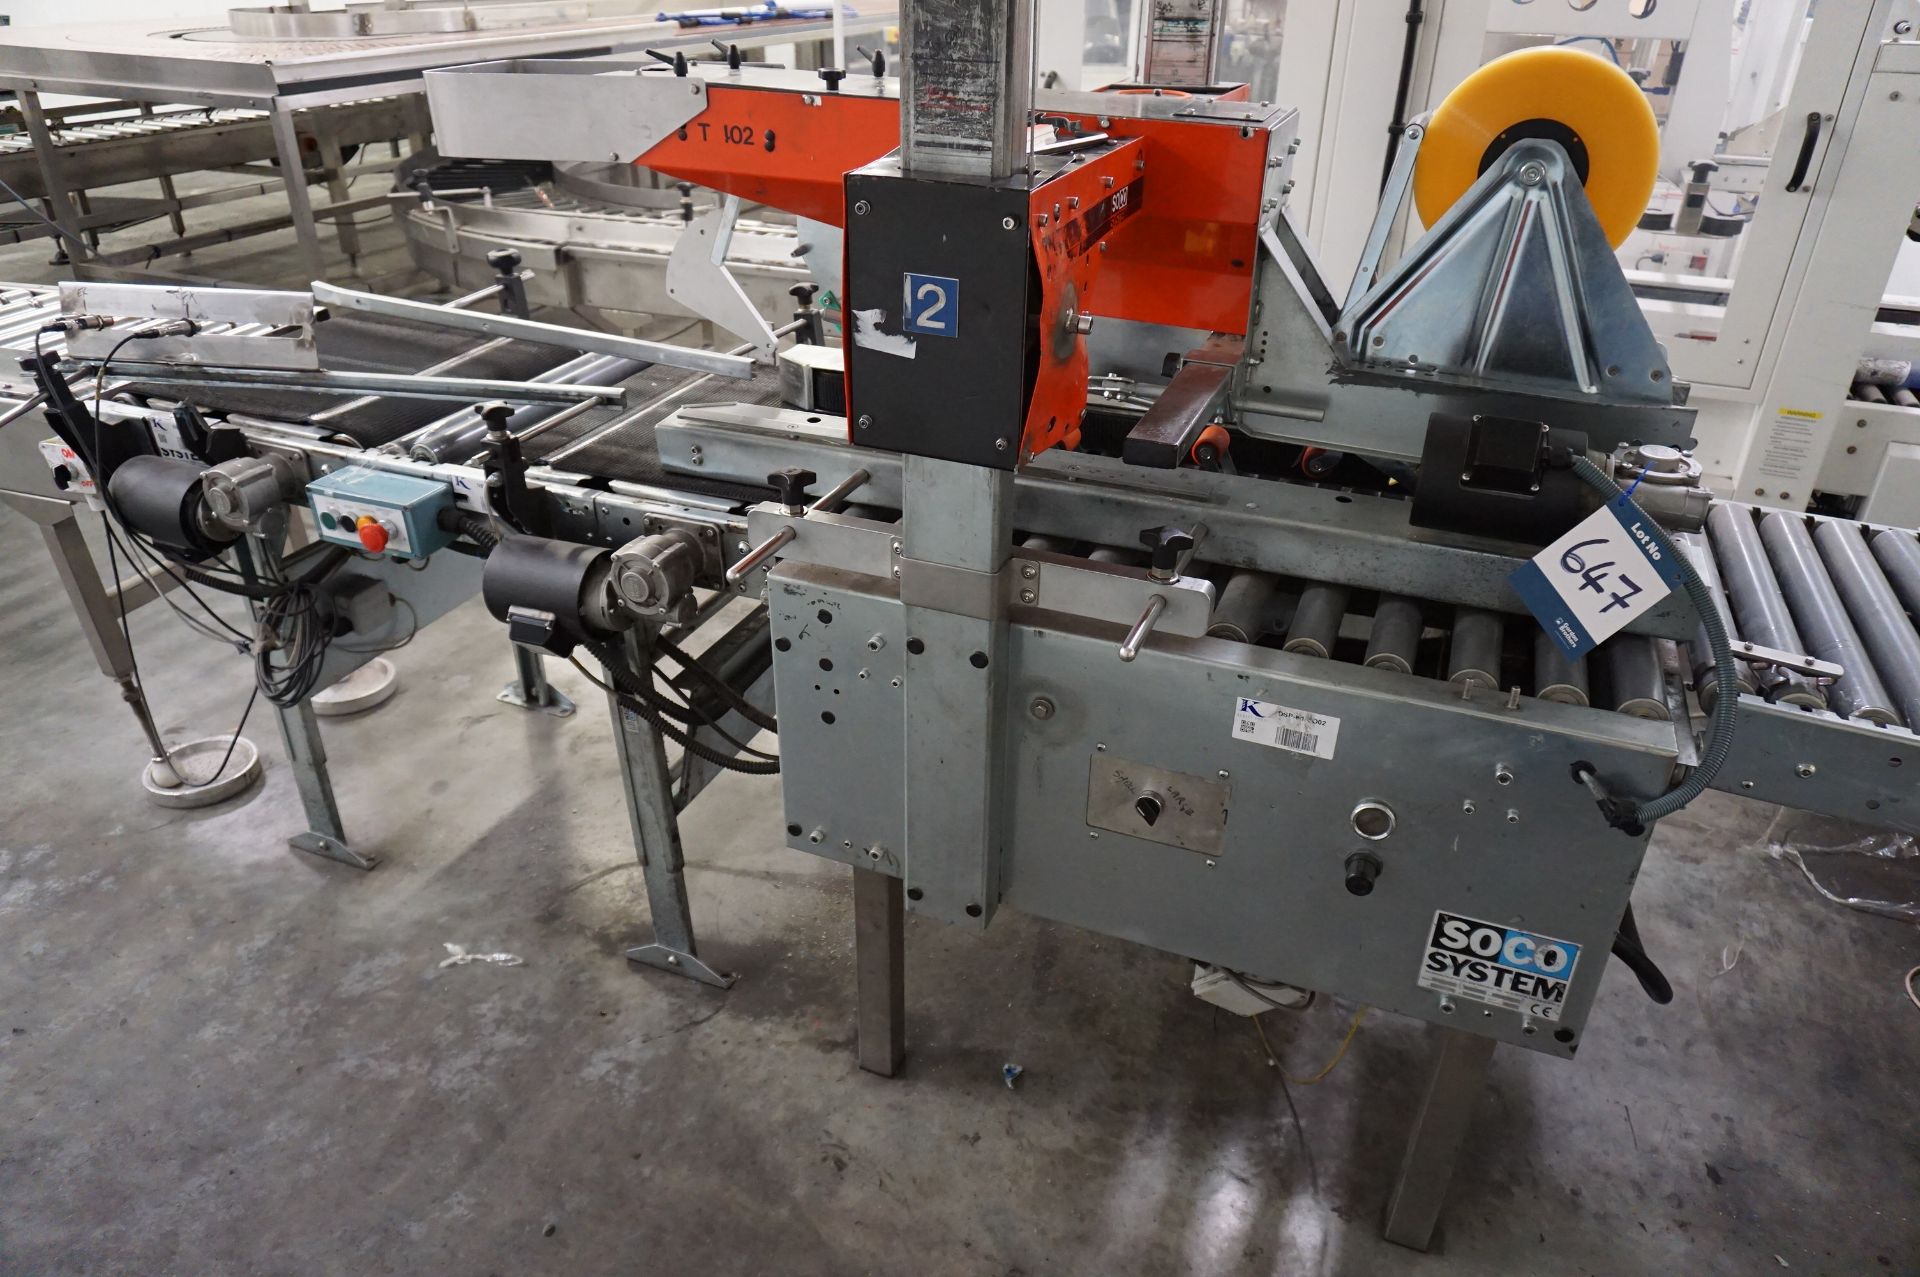 Soco System, Model: T402 box taping machine, Serial No. N/A (2000) with infeed/outfeed conveyor